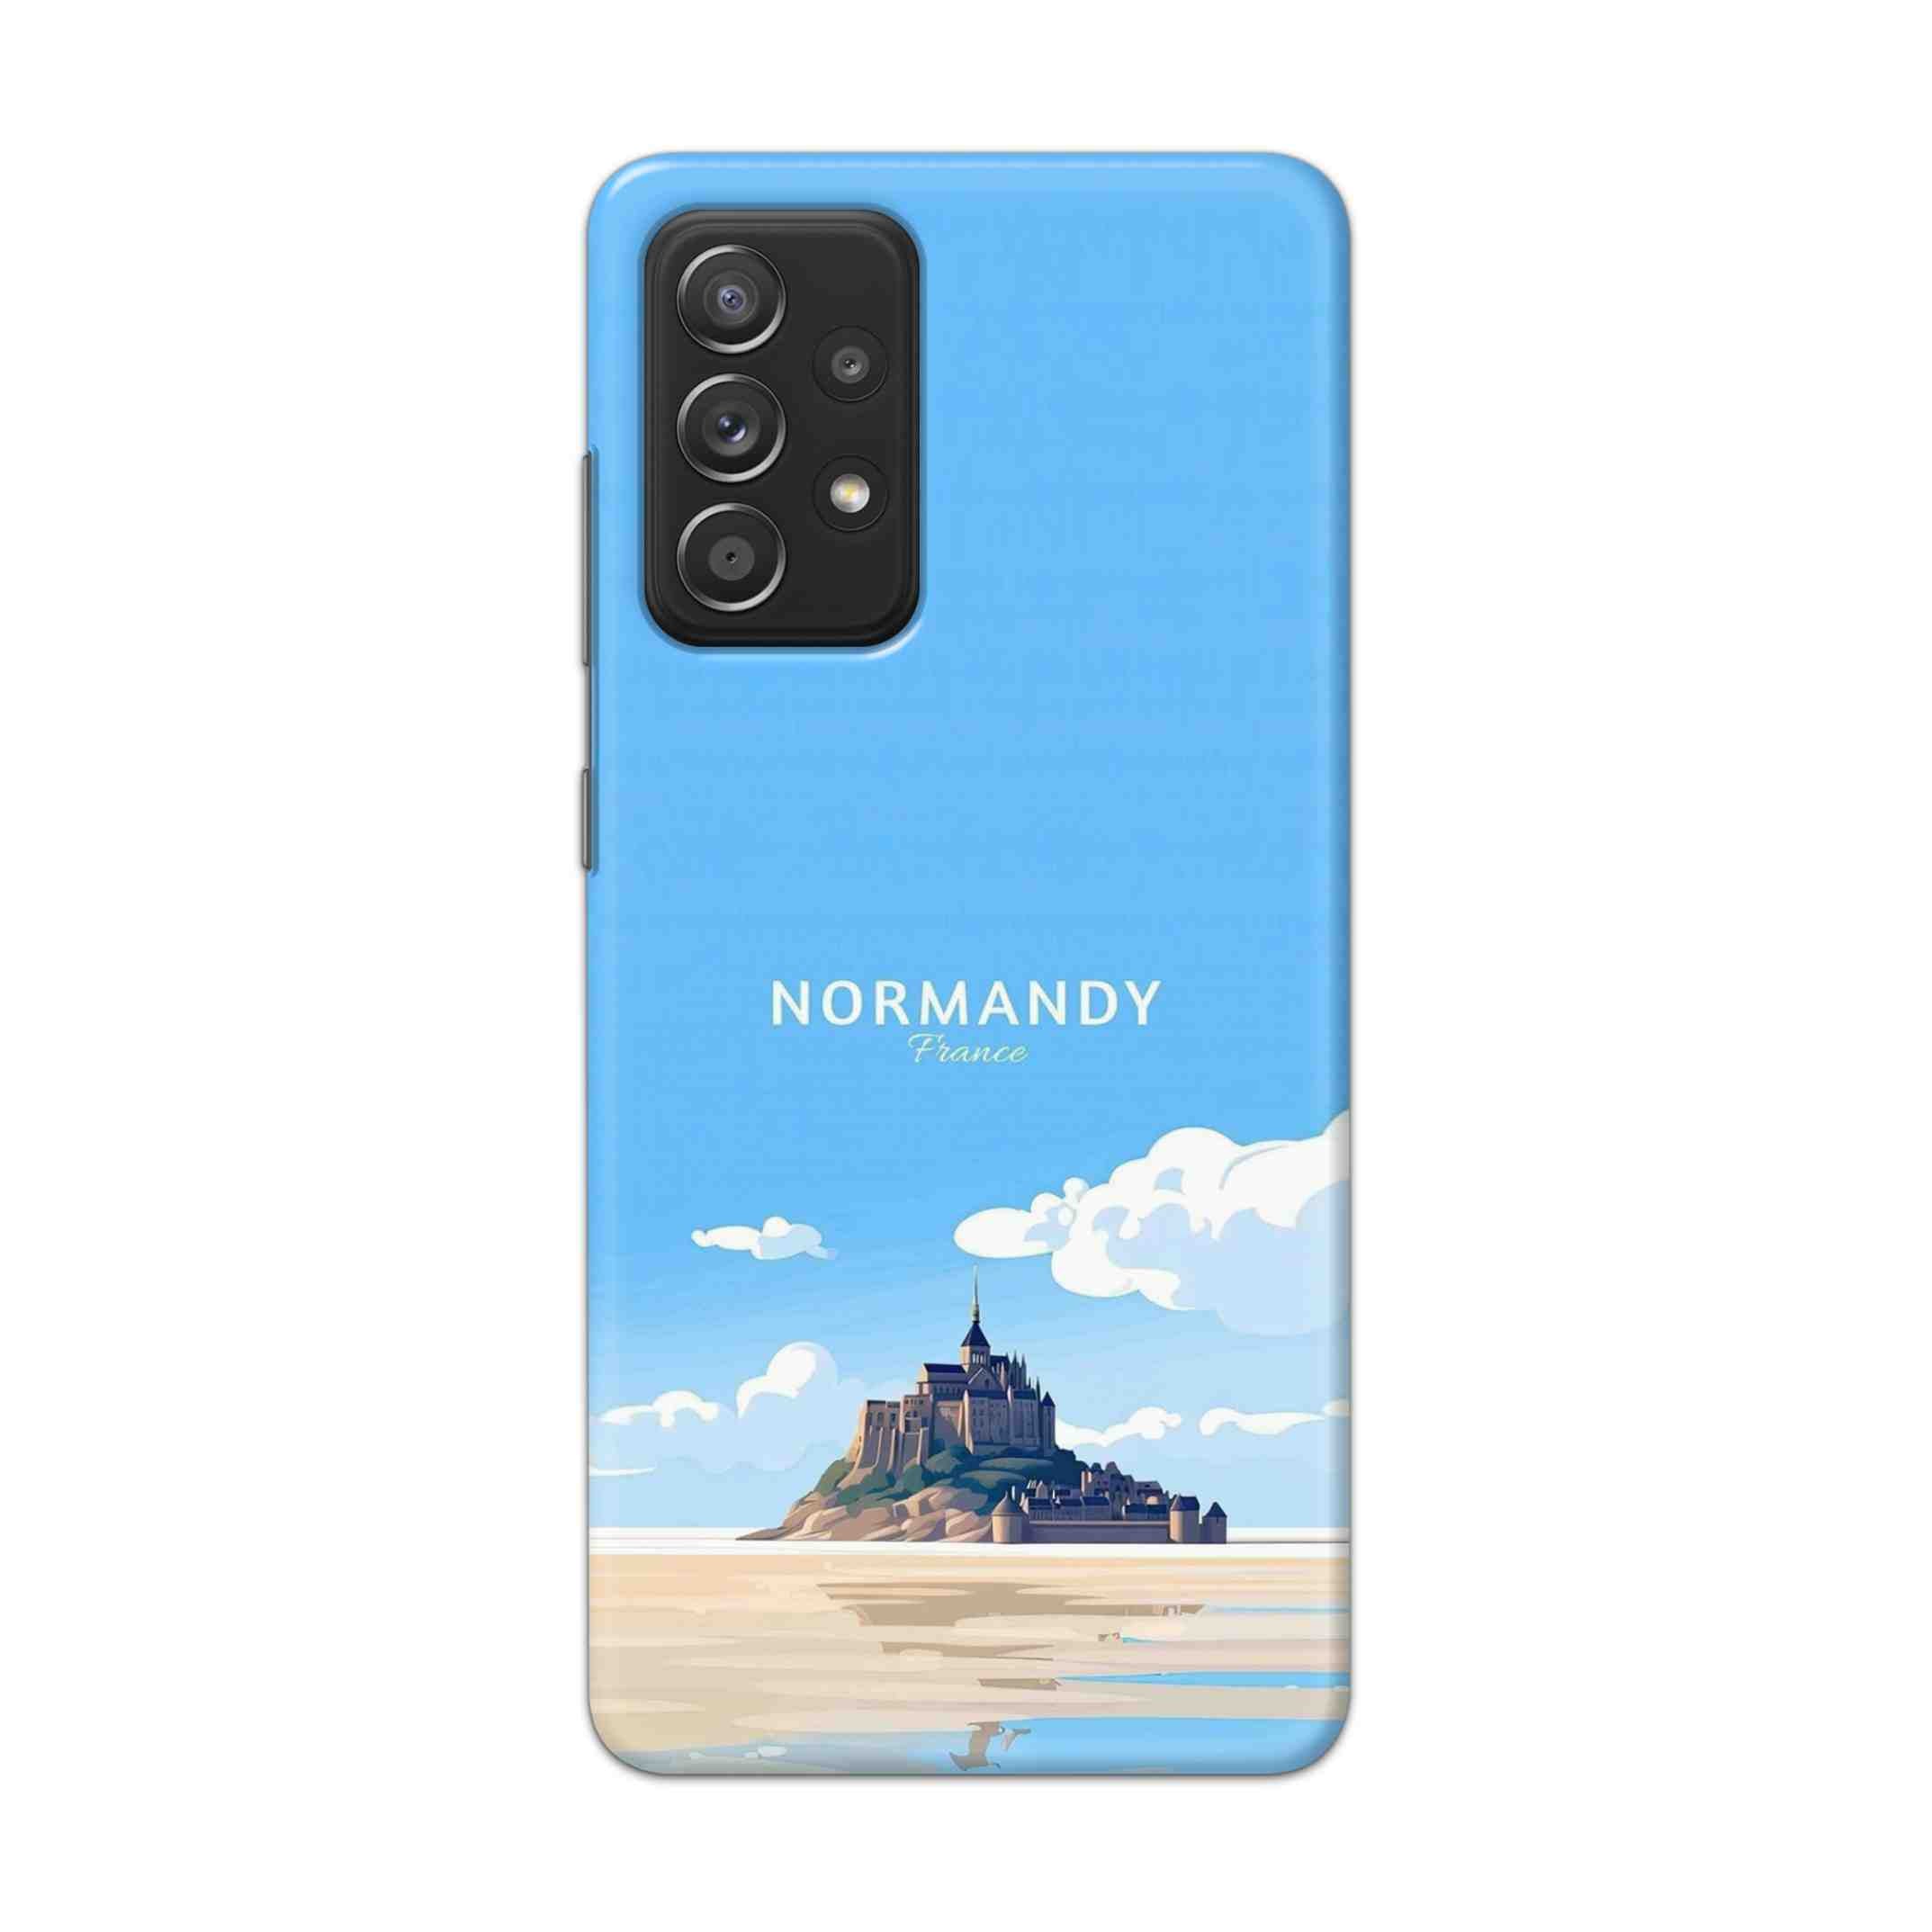 Buy Normandy Hard Back Mobile Phone Case Cover For Samsung Galaxy A52 Online